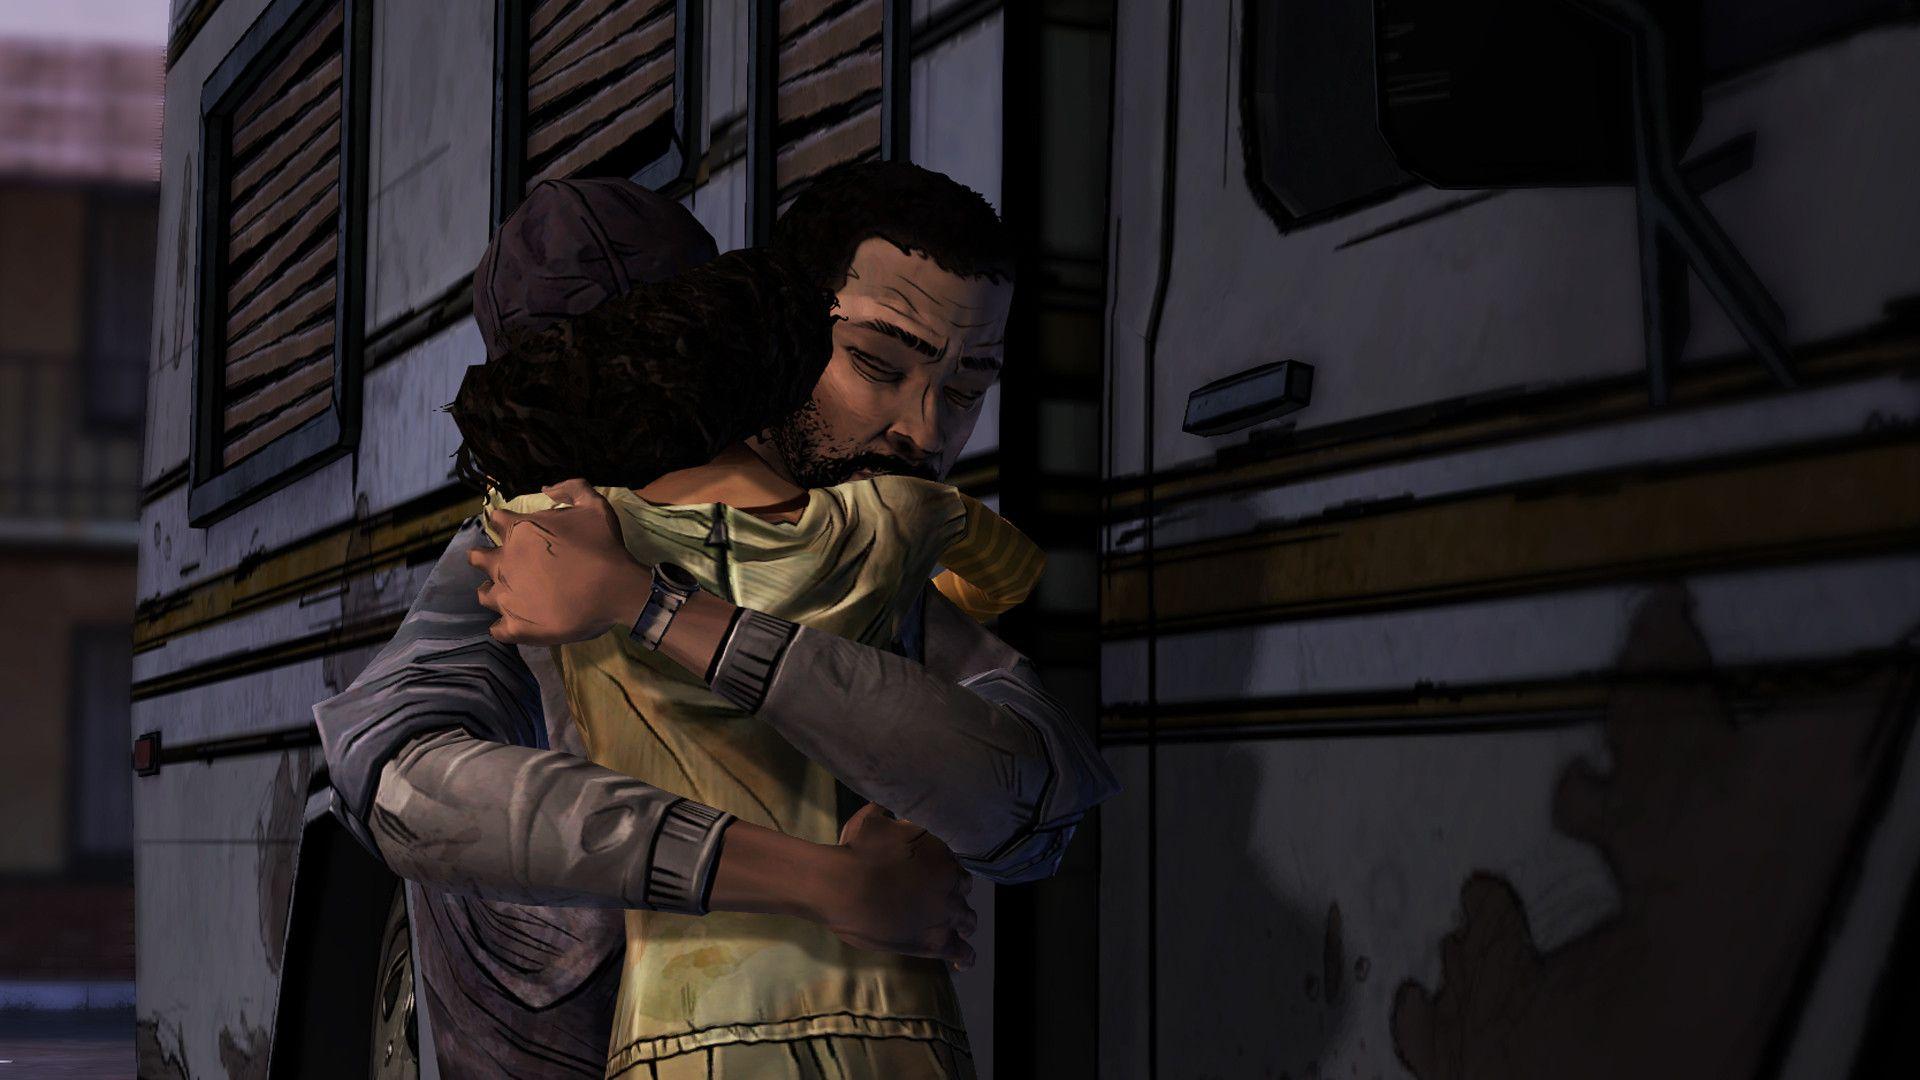 image For > Walking Dead Game iPhone Wallpaper